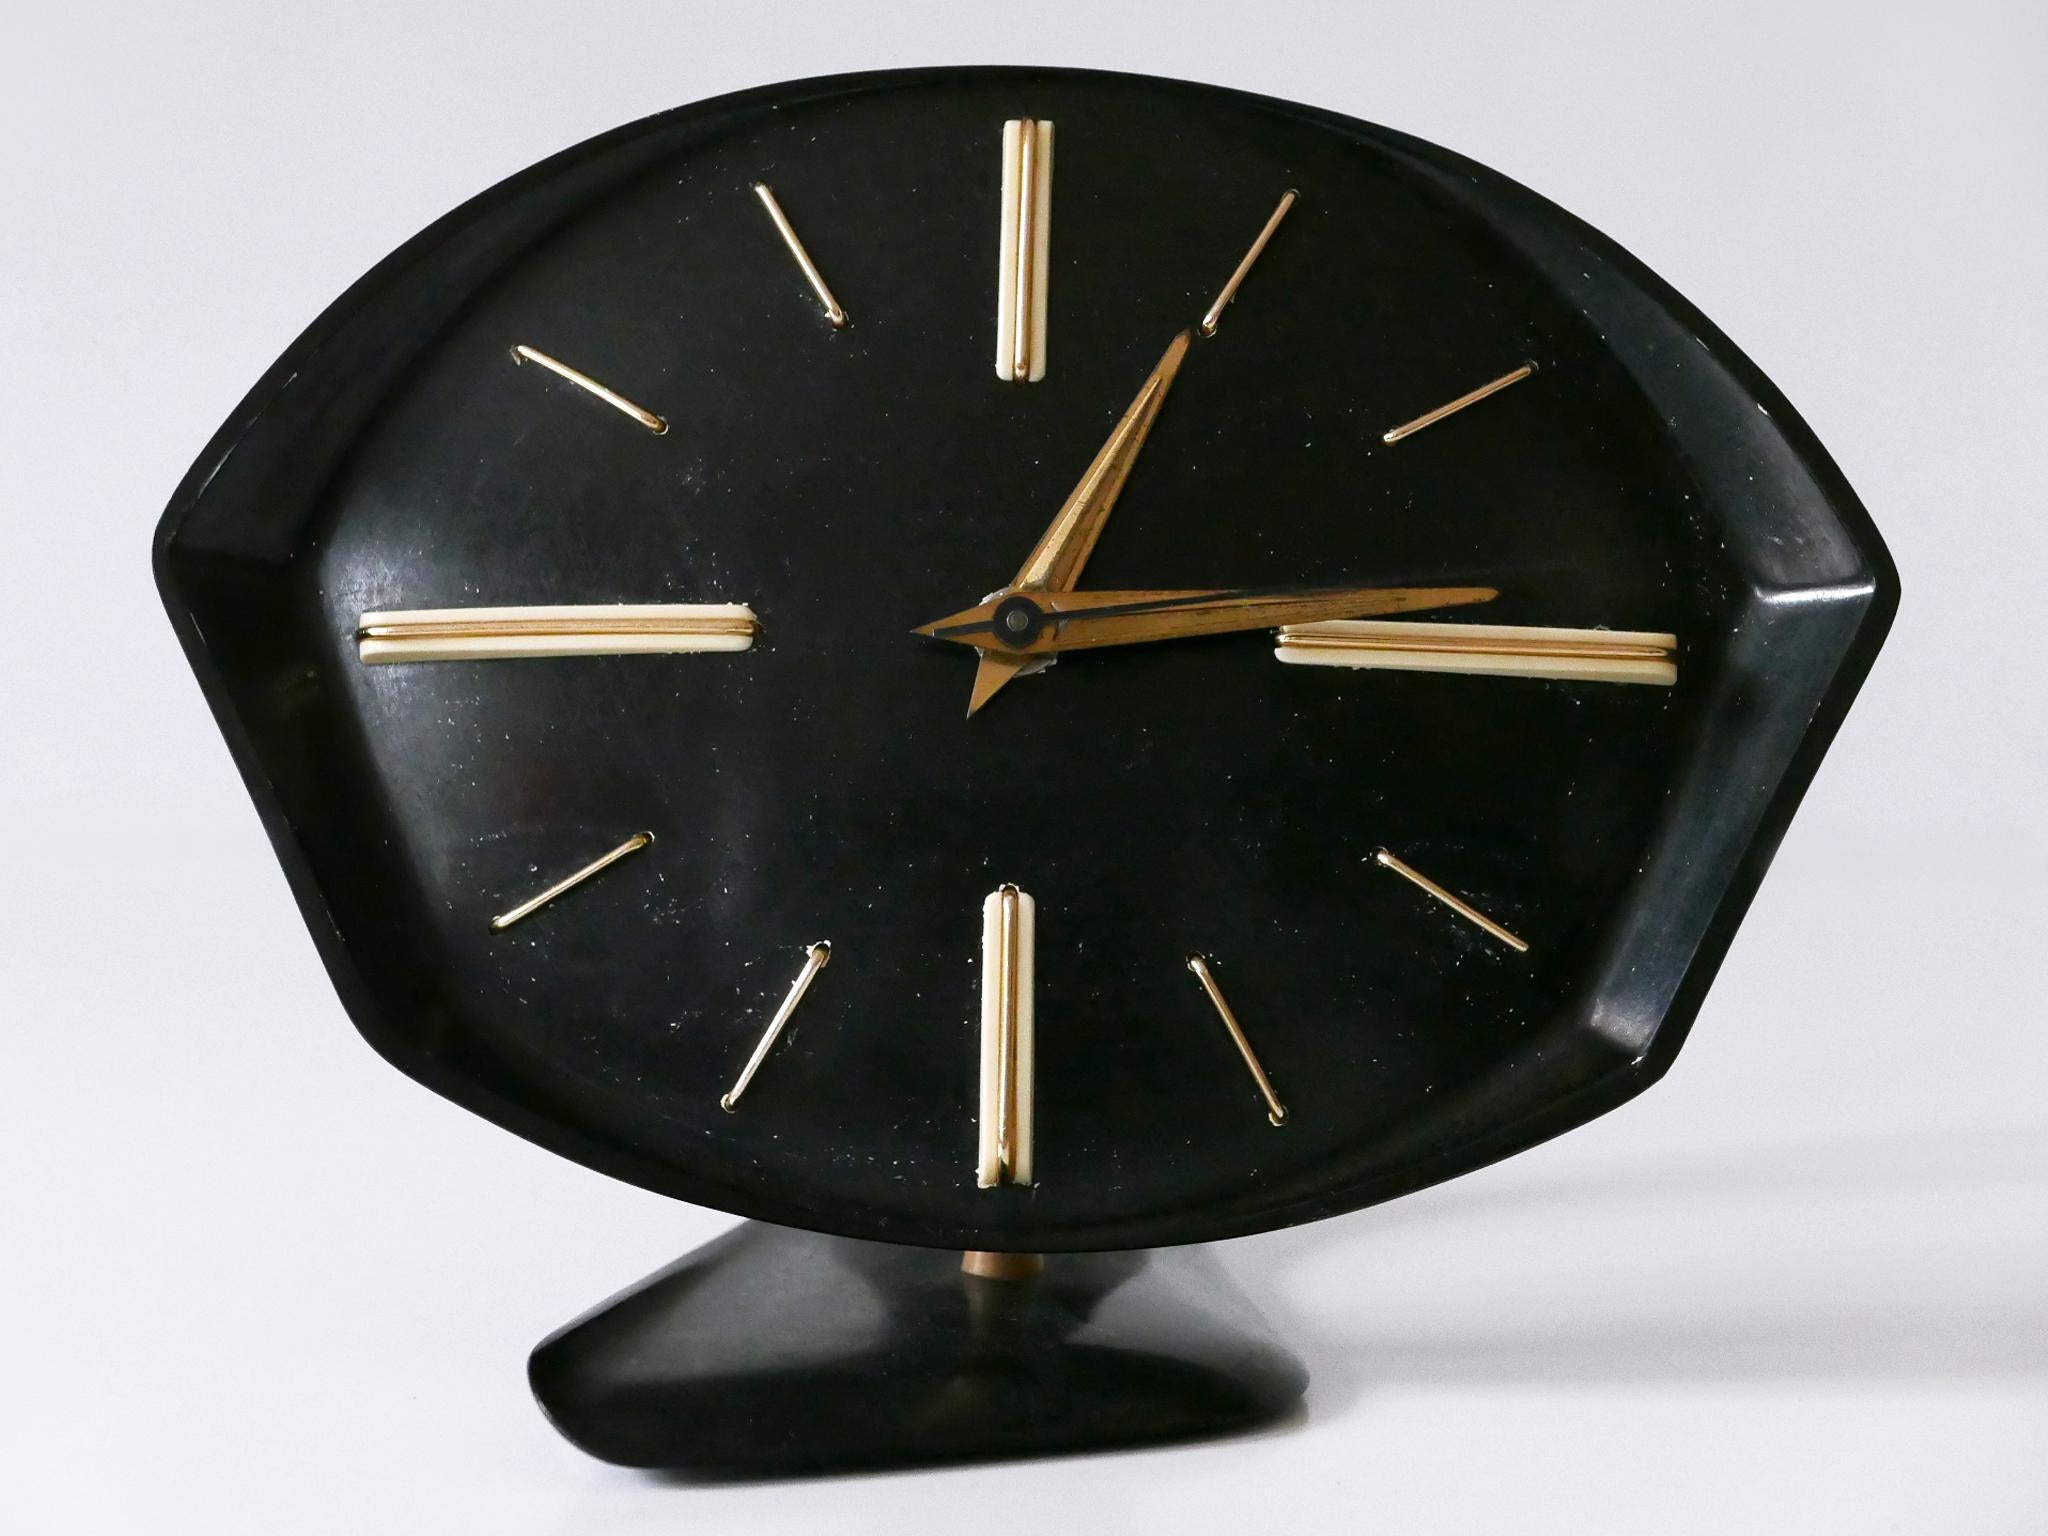 Rare and Lovely Mid-Century Modern Bakelite Table or Wall Clock by PRIM 1950s In Good Condition For Sale In Munich, DE